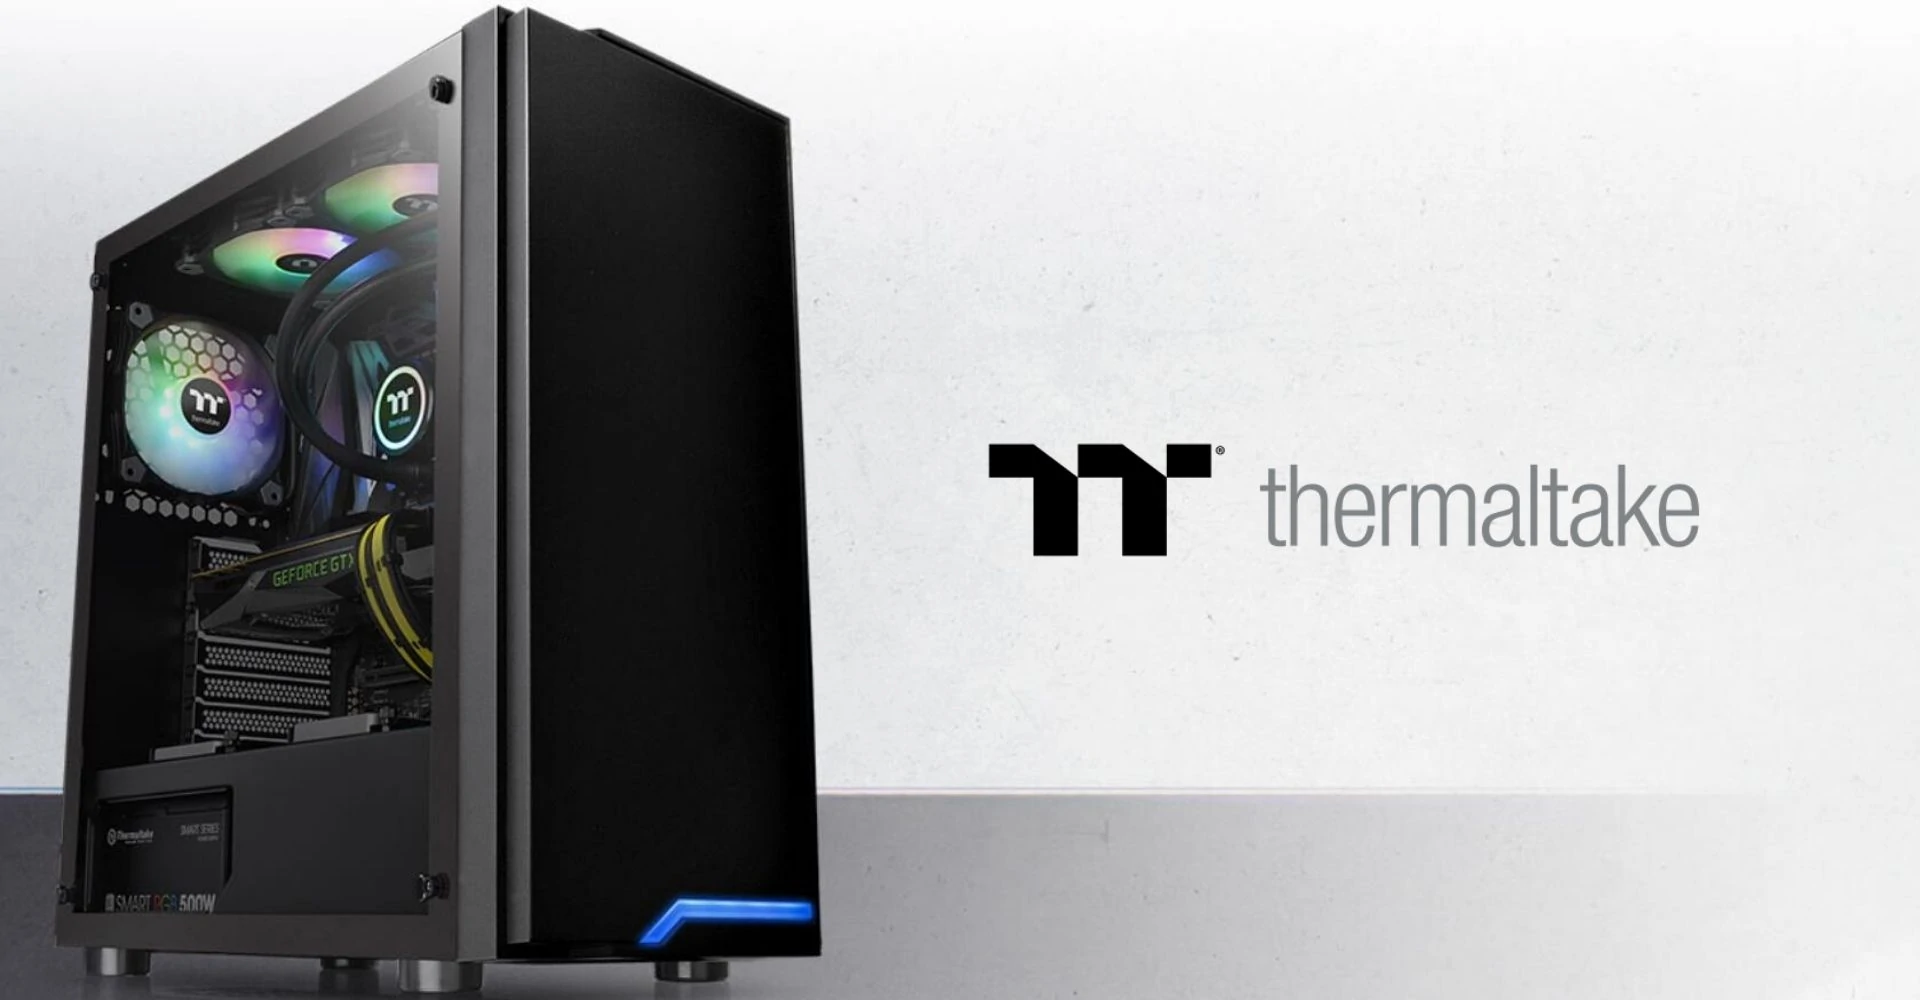 Thermaltake H100 Tempered Glass Mid Tower PC Case – Almost identical to the H200 but with less RGB and a little cheaper